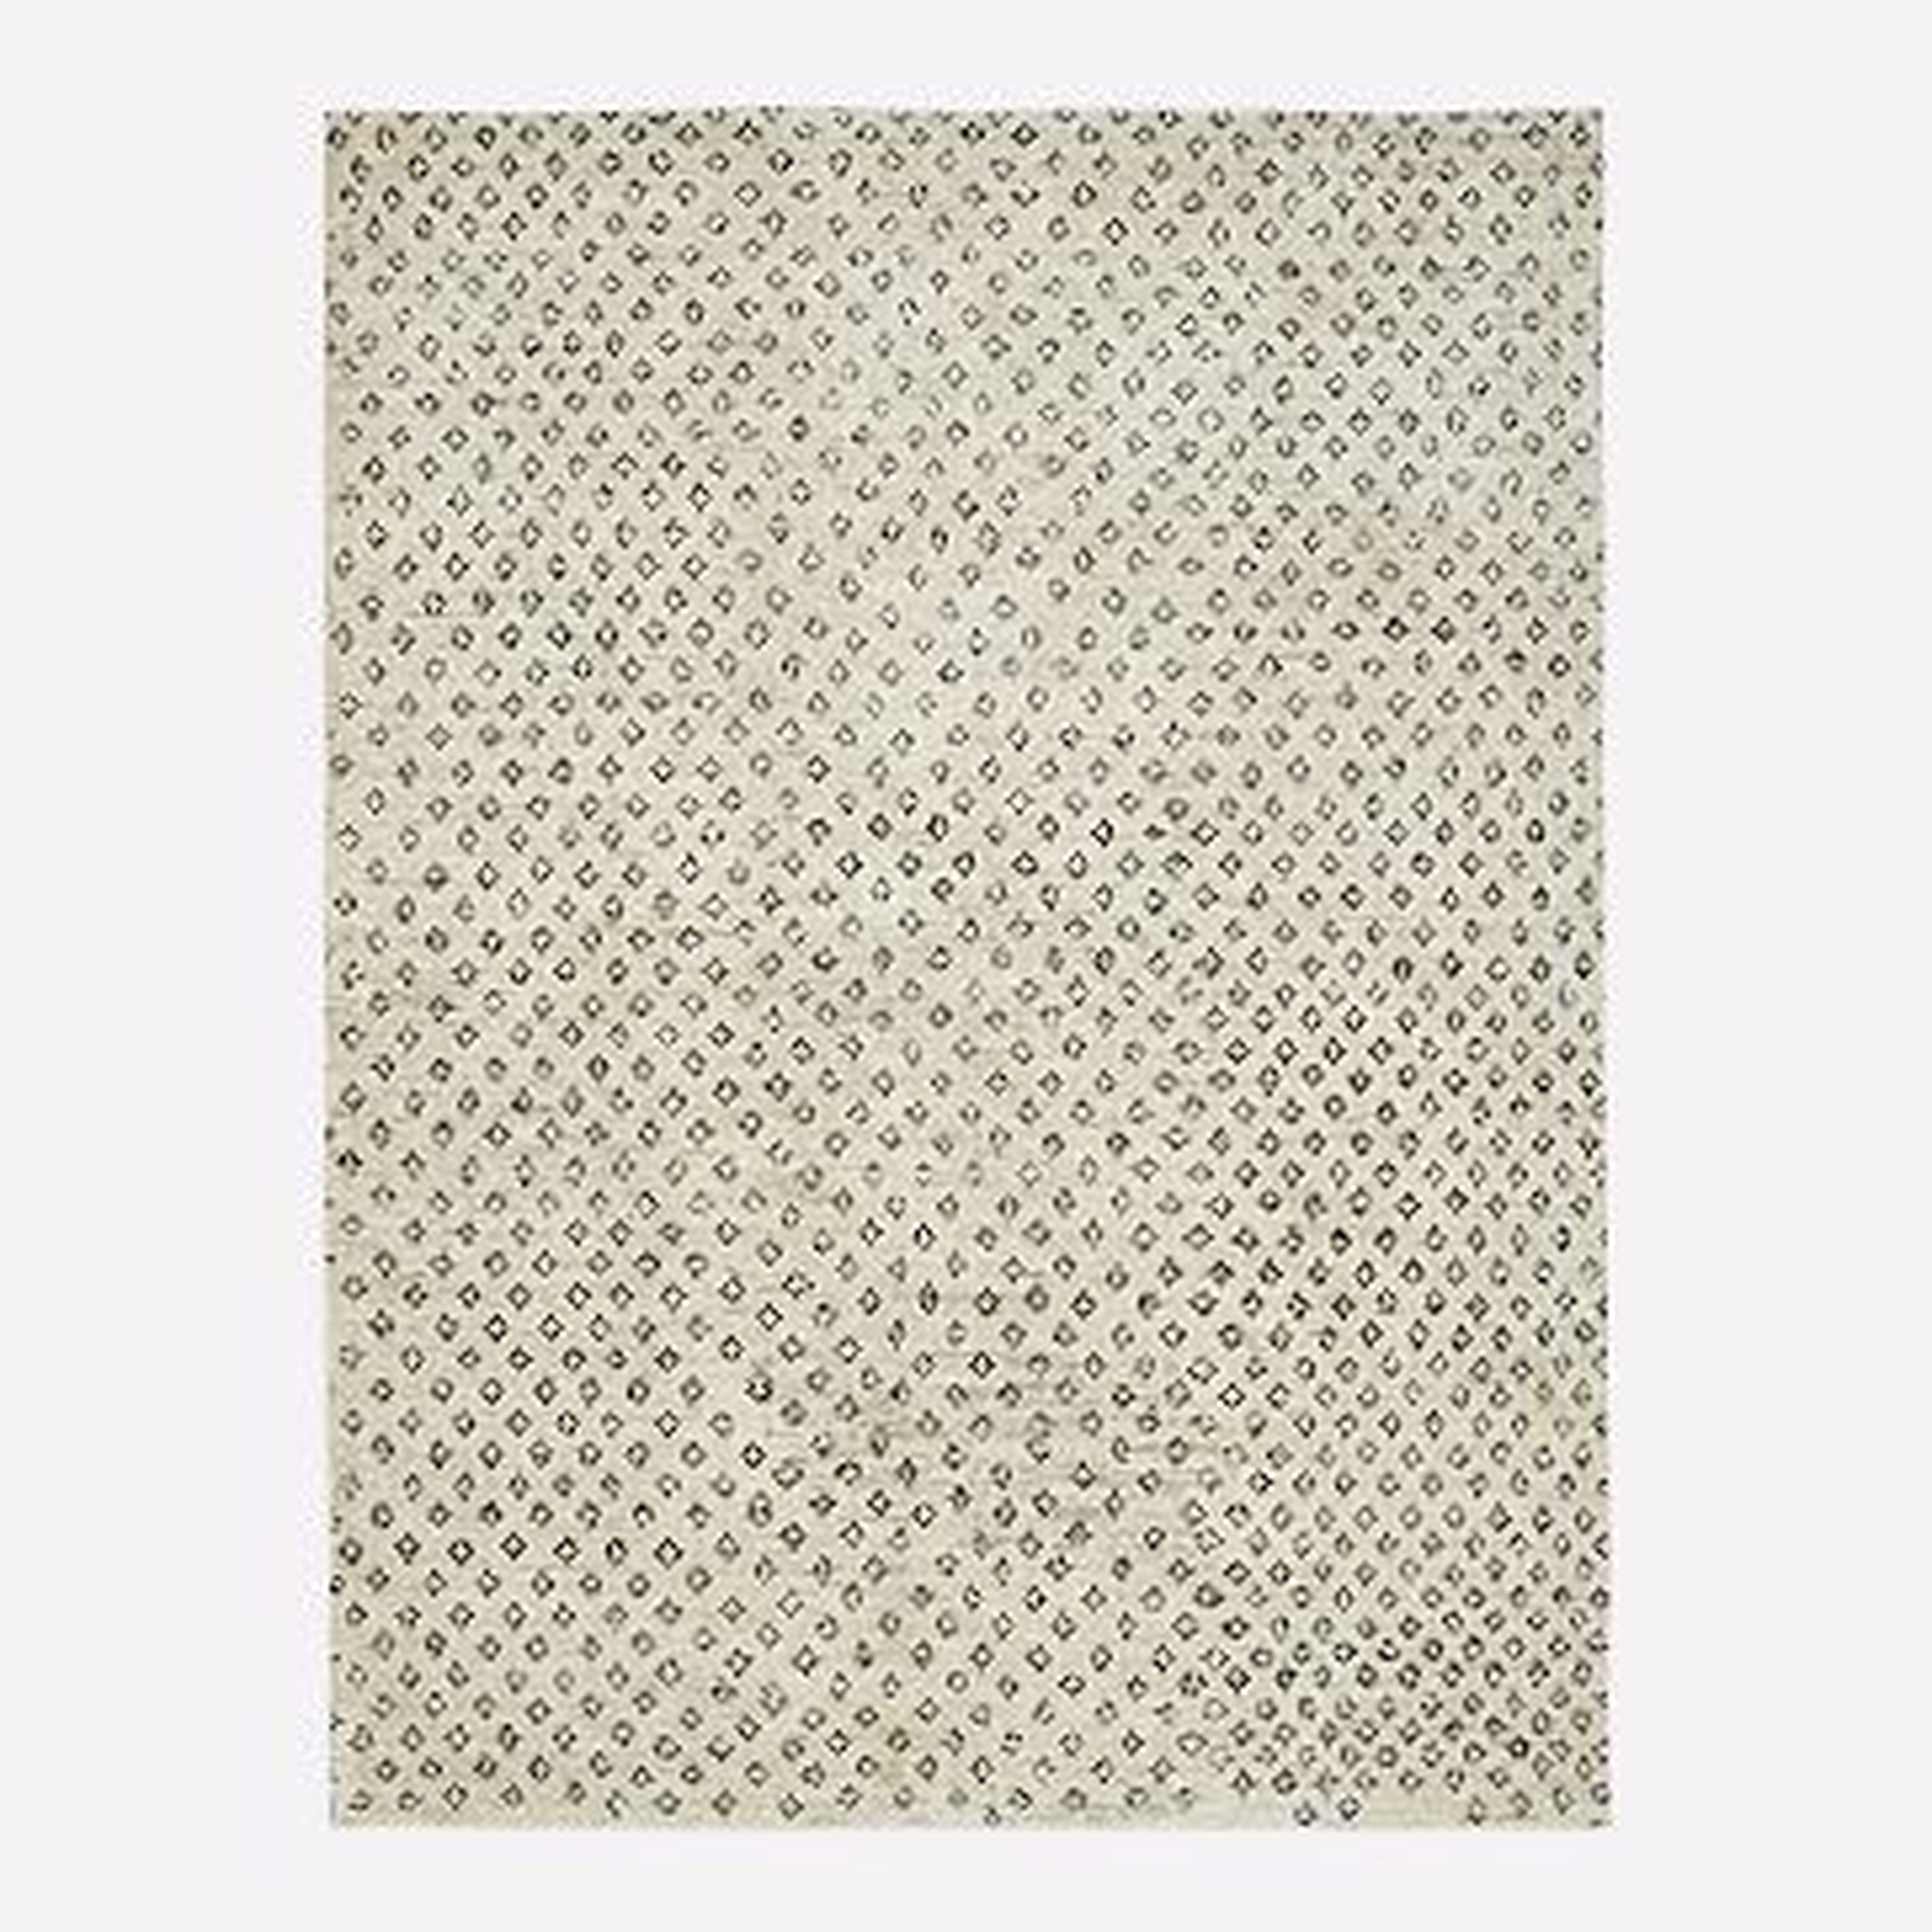 Hand Knotted Jute Diamonds Rug, 5'x8', Natural - West Elm